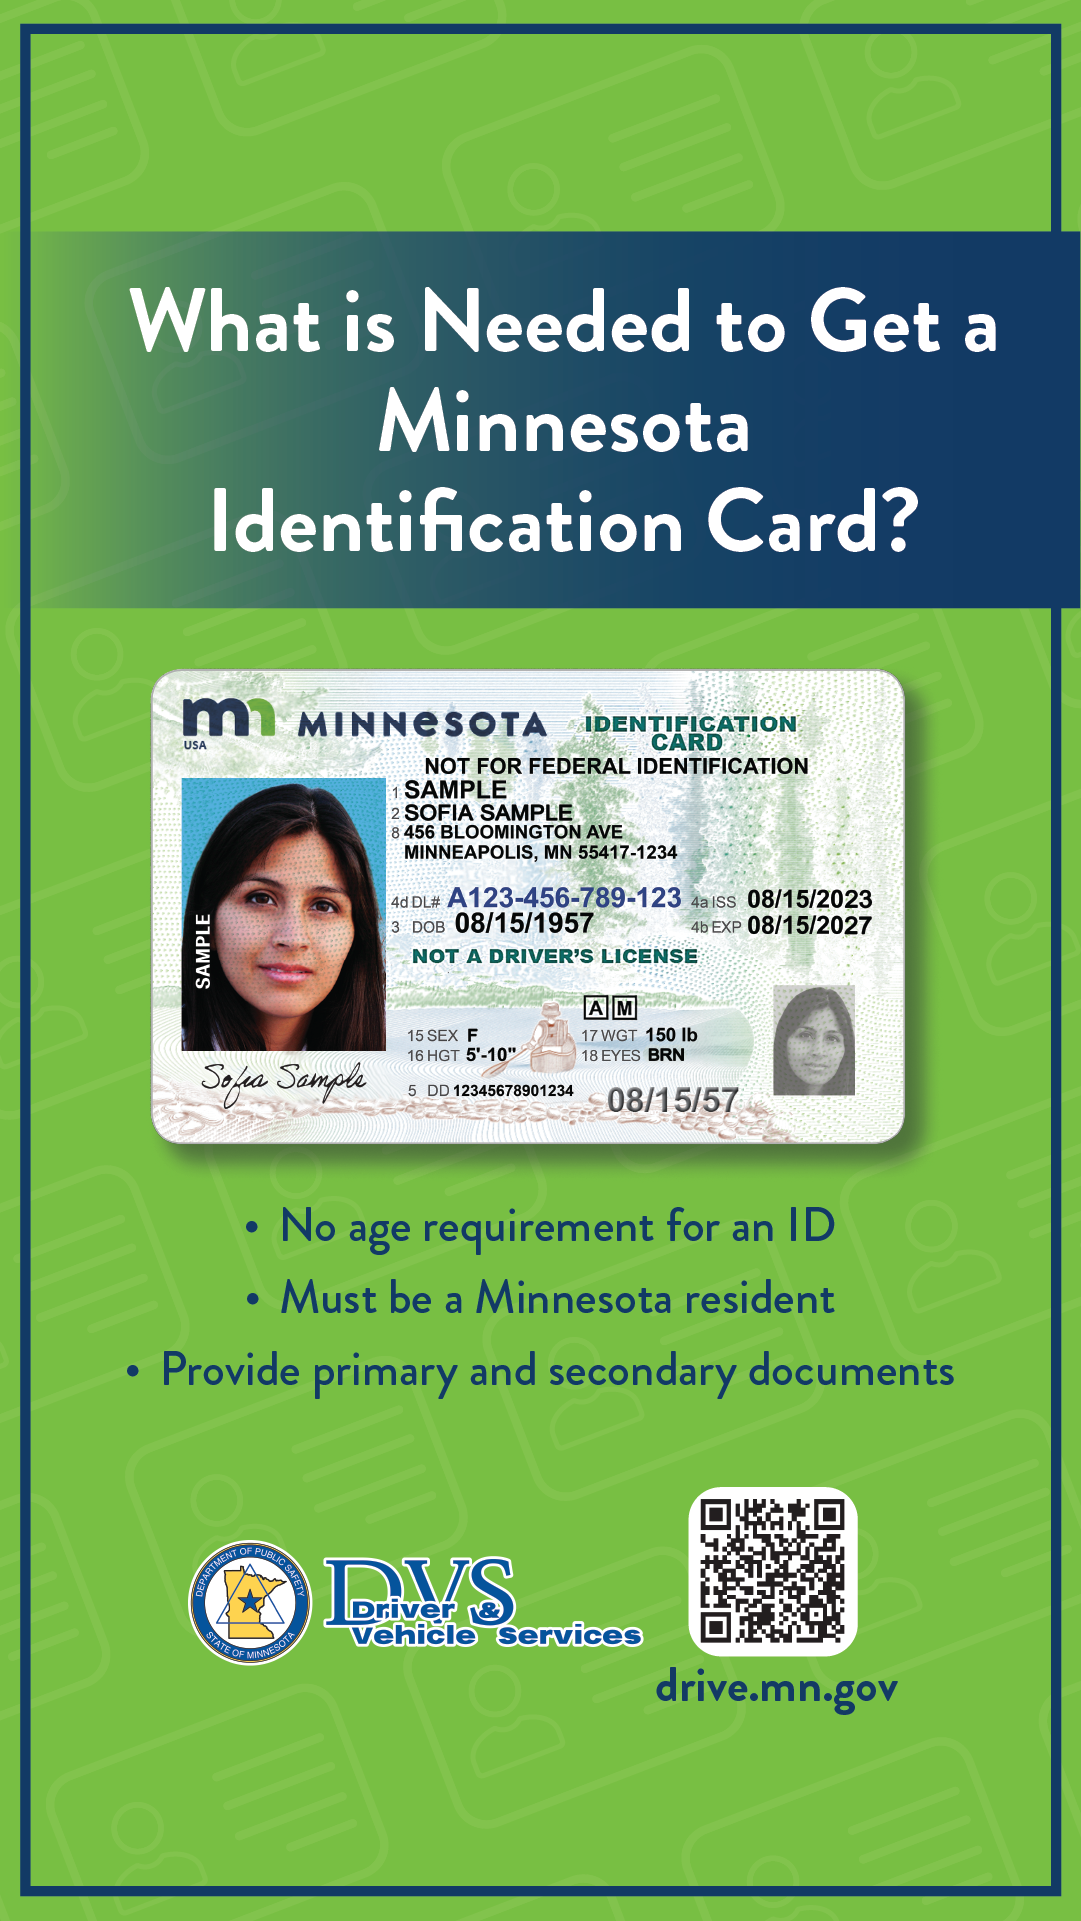 DVS Home - New Driver's License and ID Card Designs